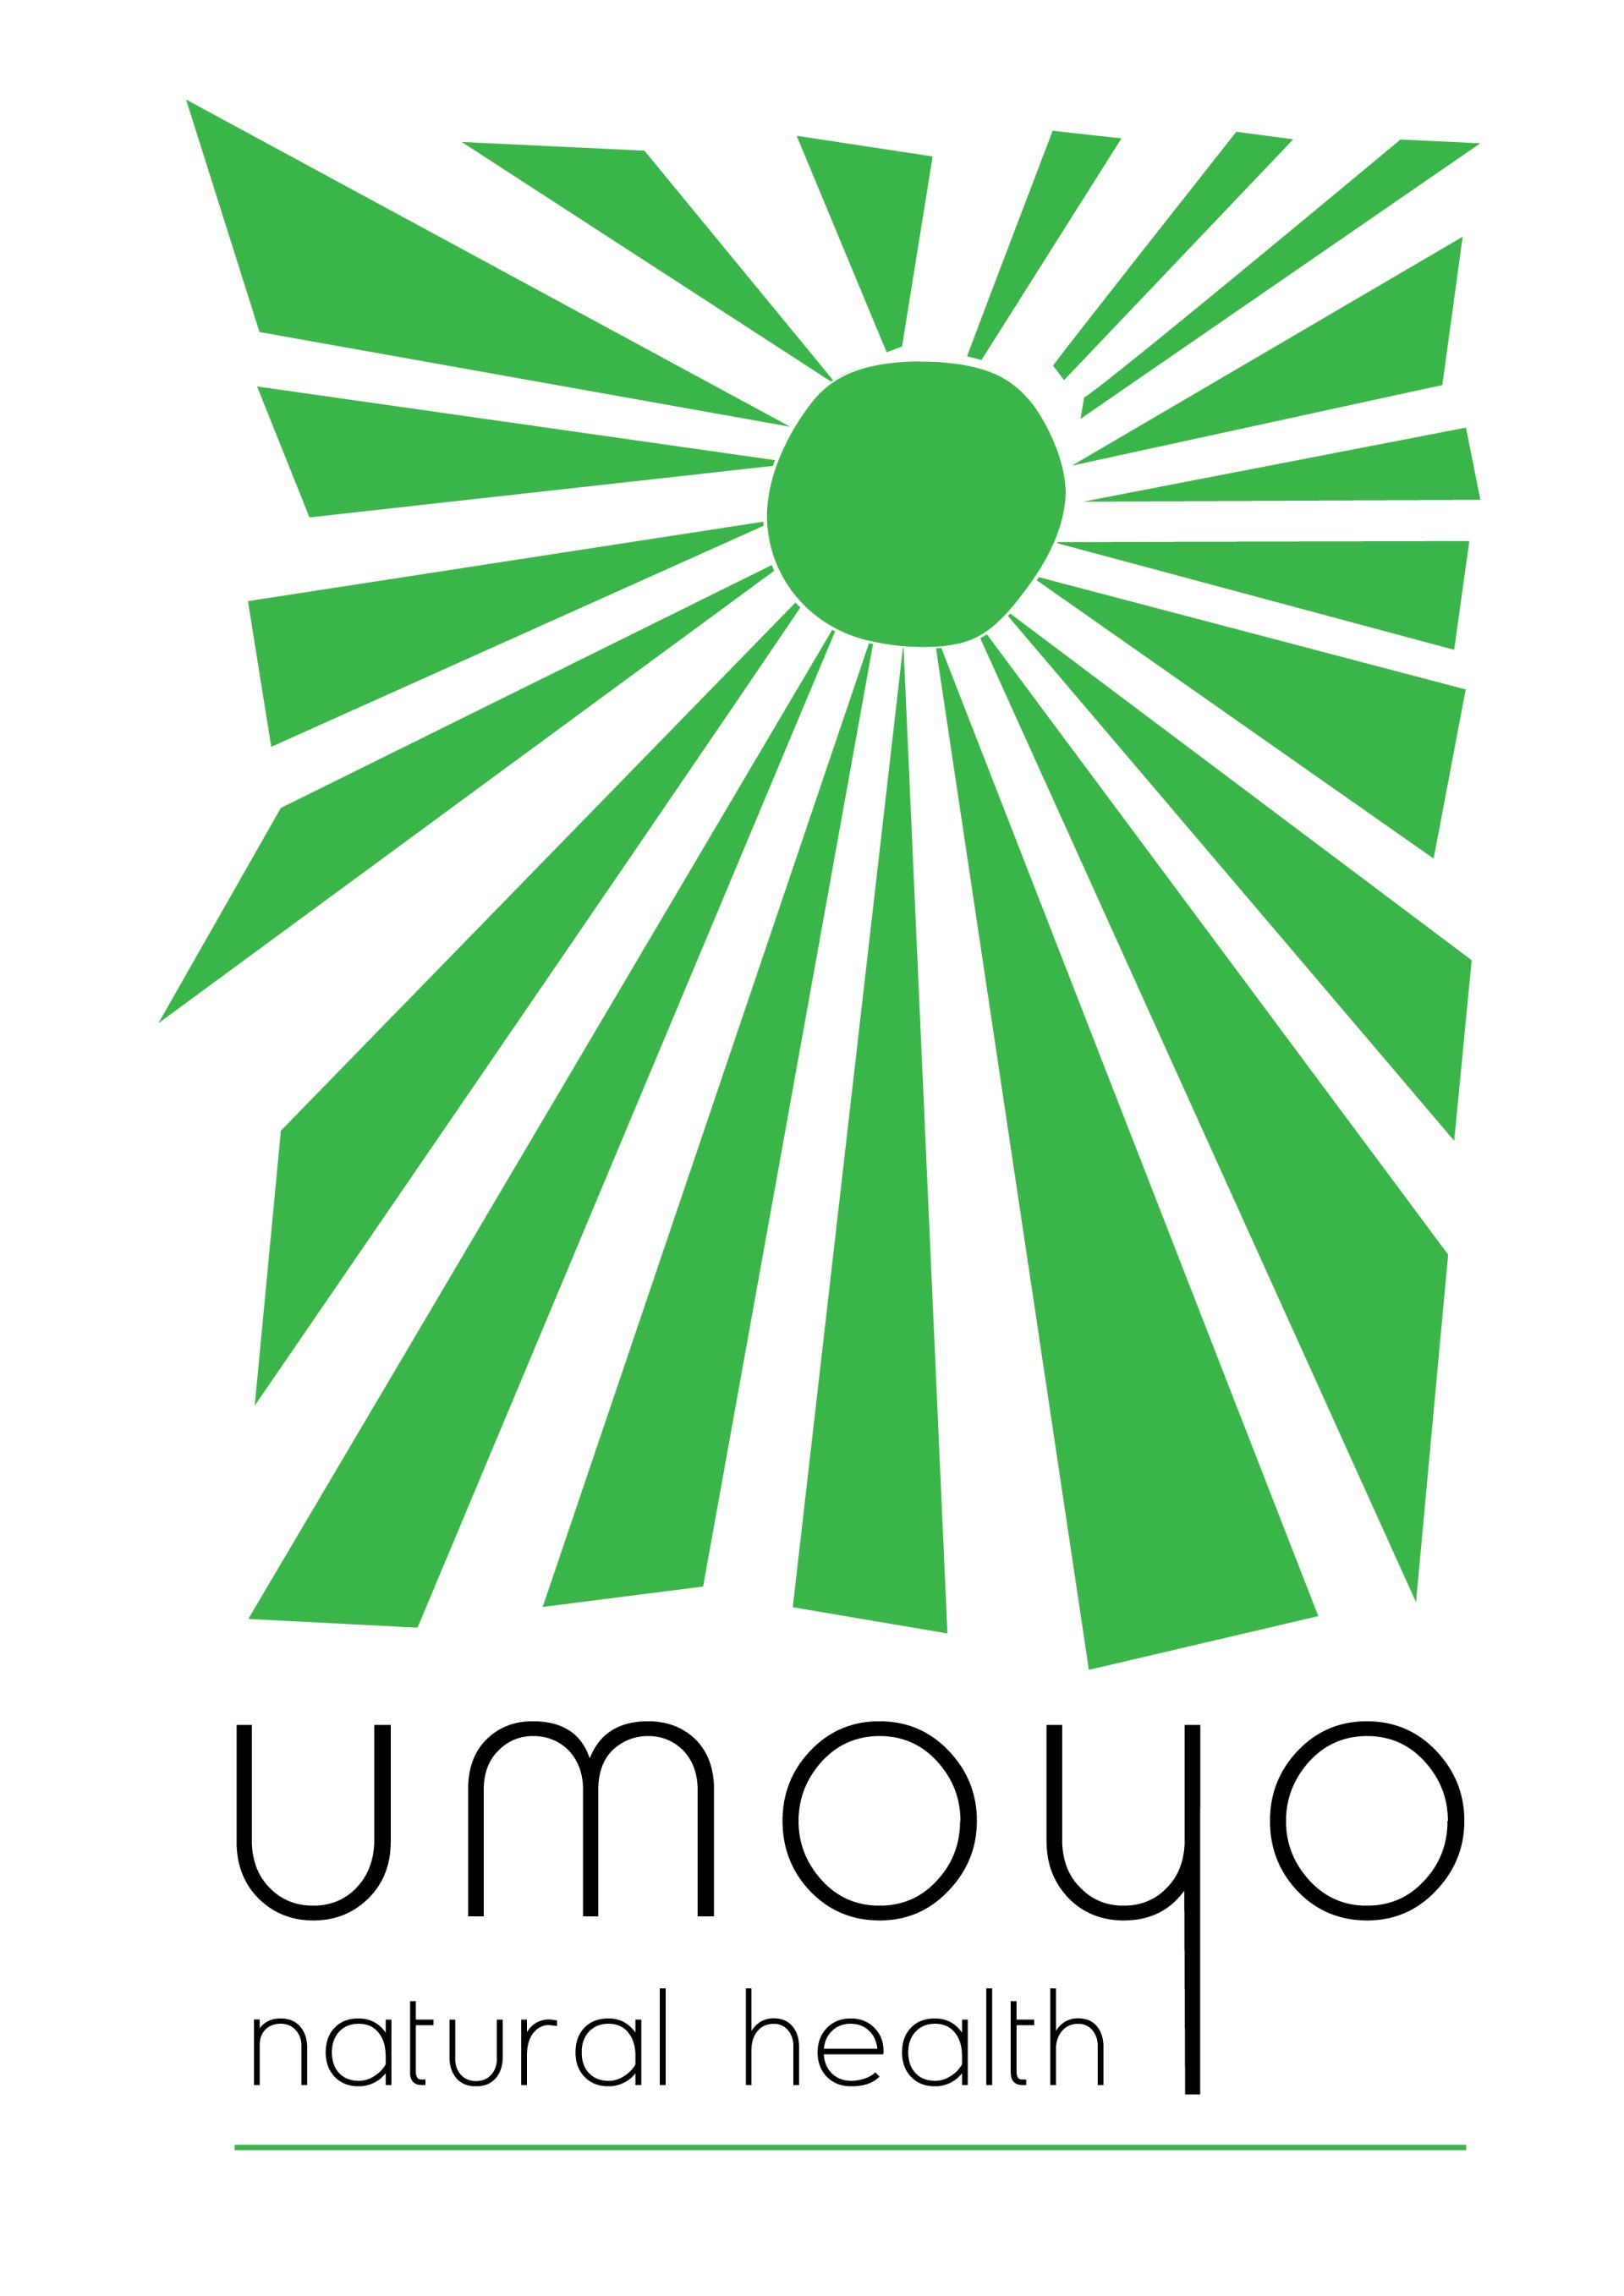 A green and white logo for umoyo natural health